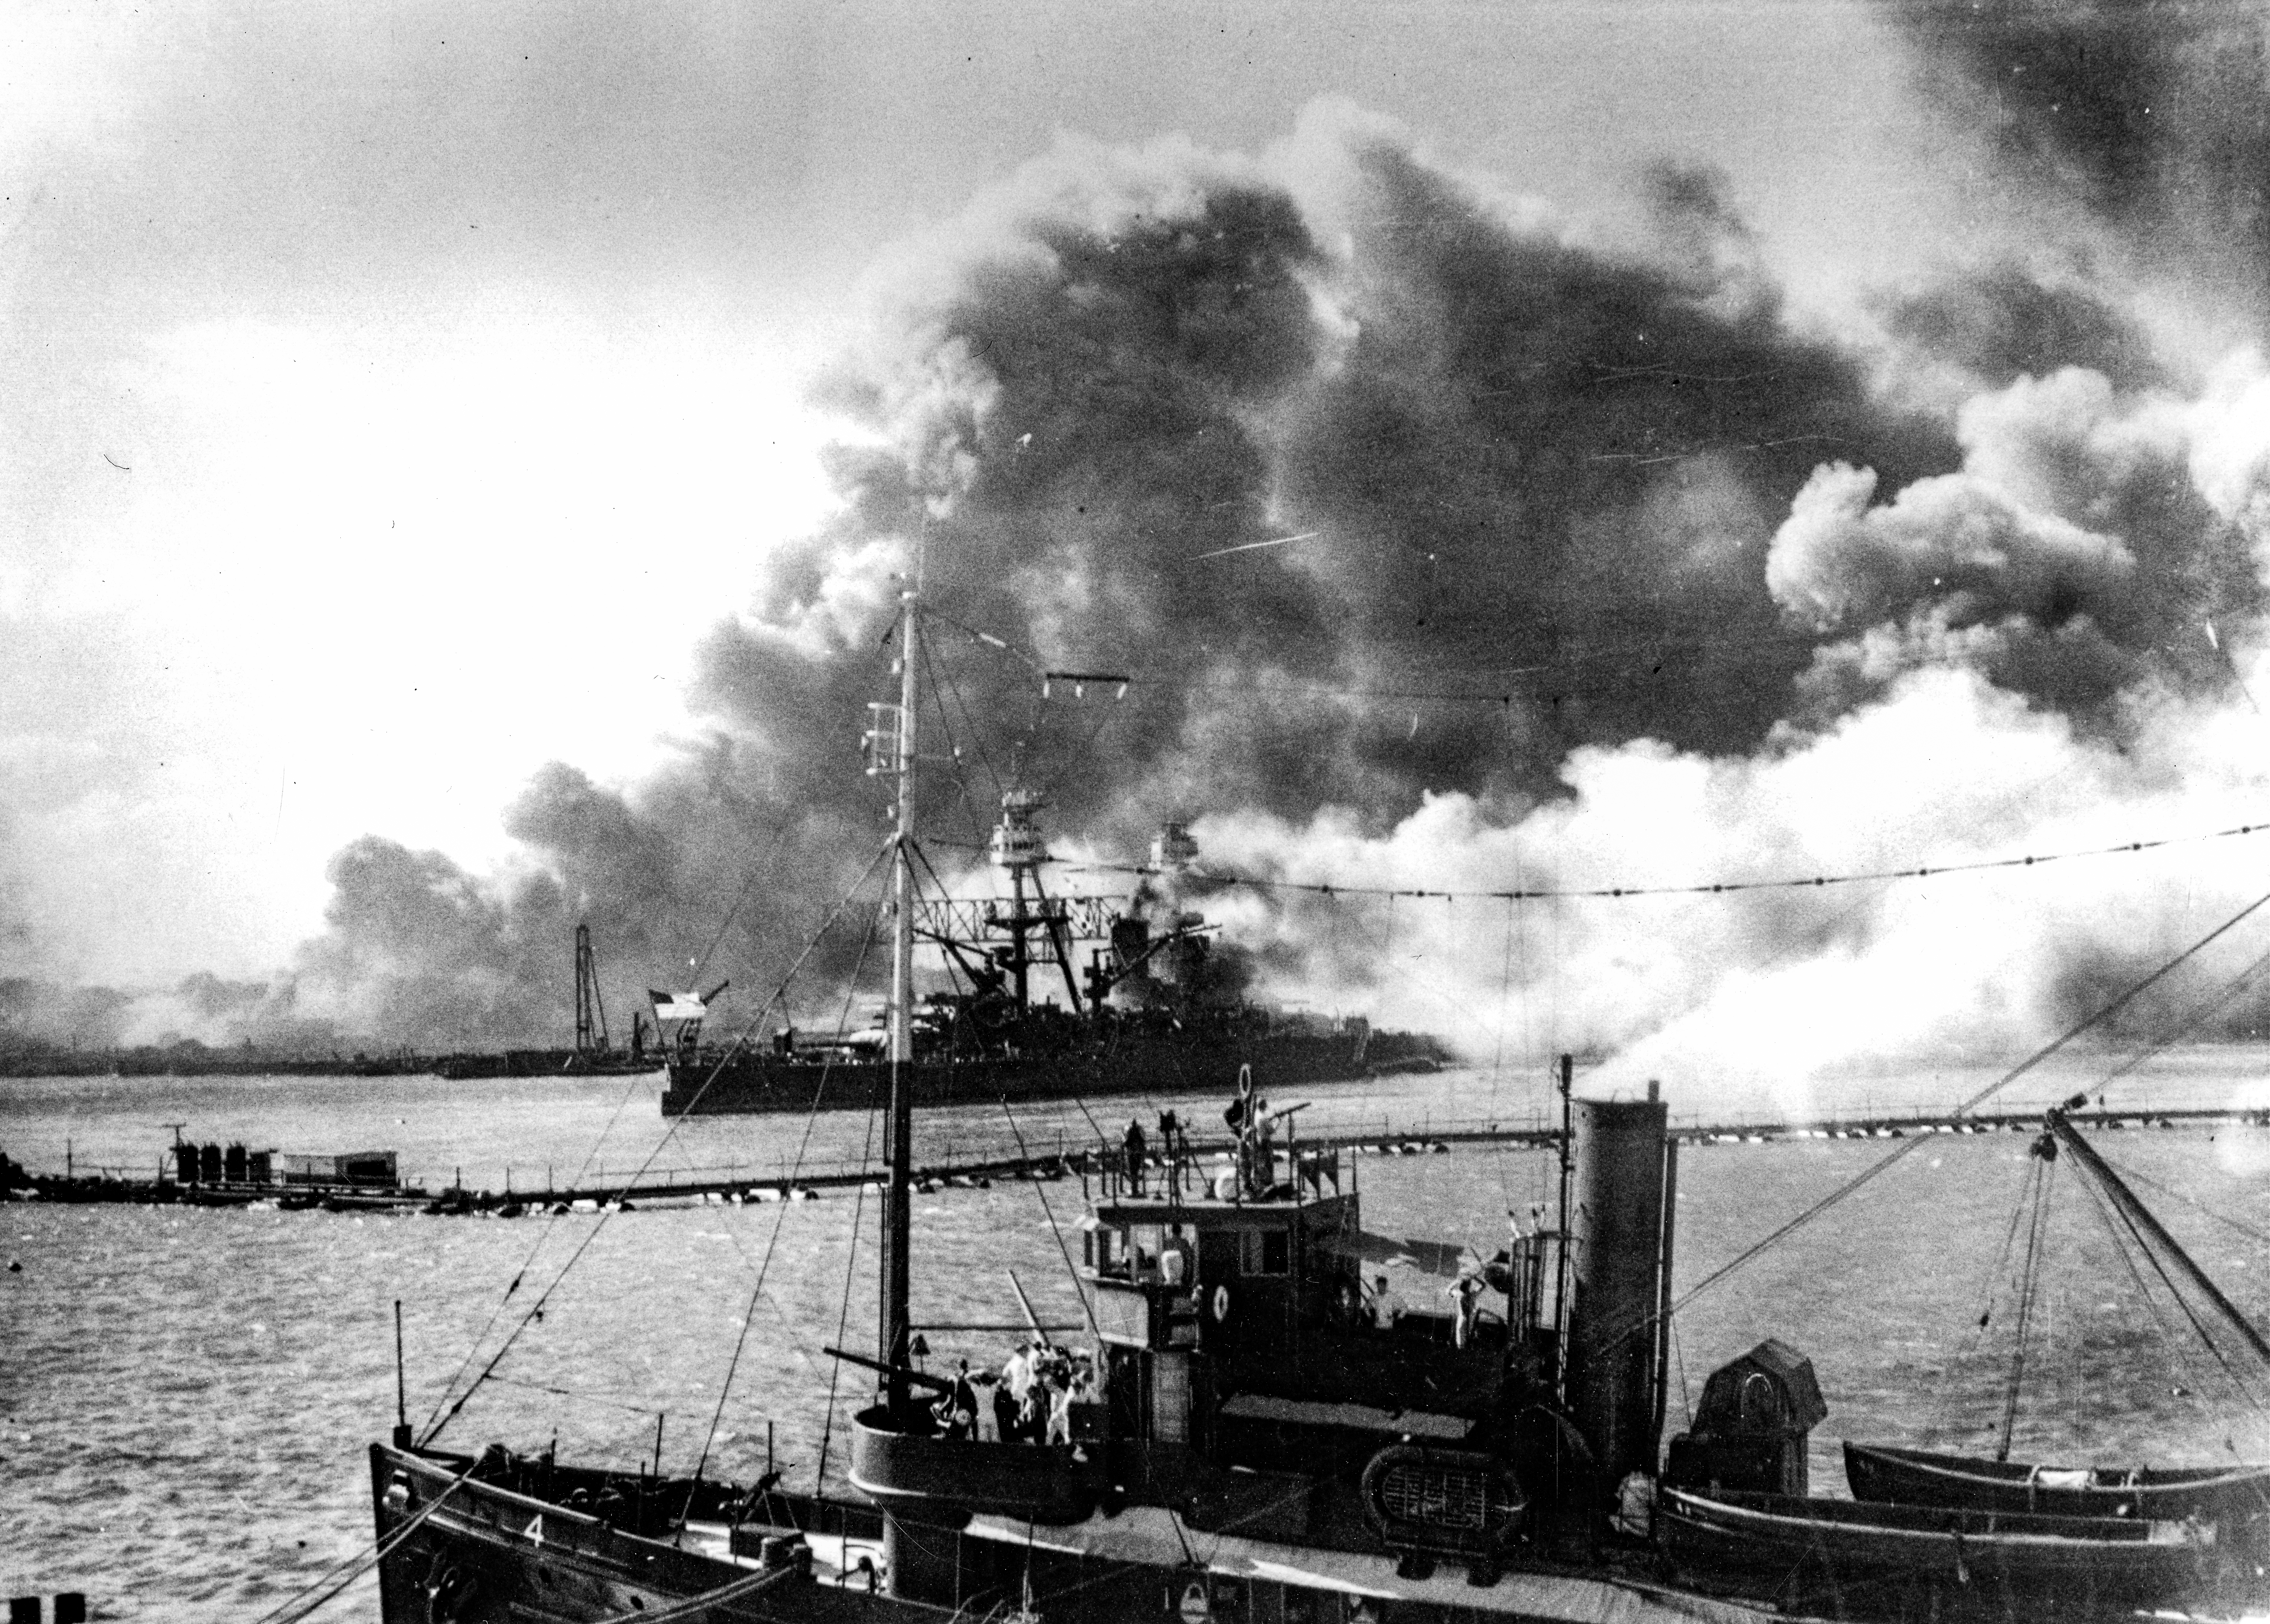 USS Nevada (BB-36) under attack by Japanese dive bombers, Pearl Harbor, TH, 7 December 1941